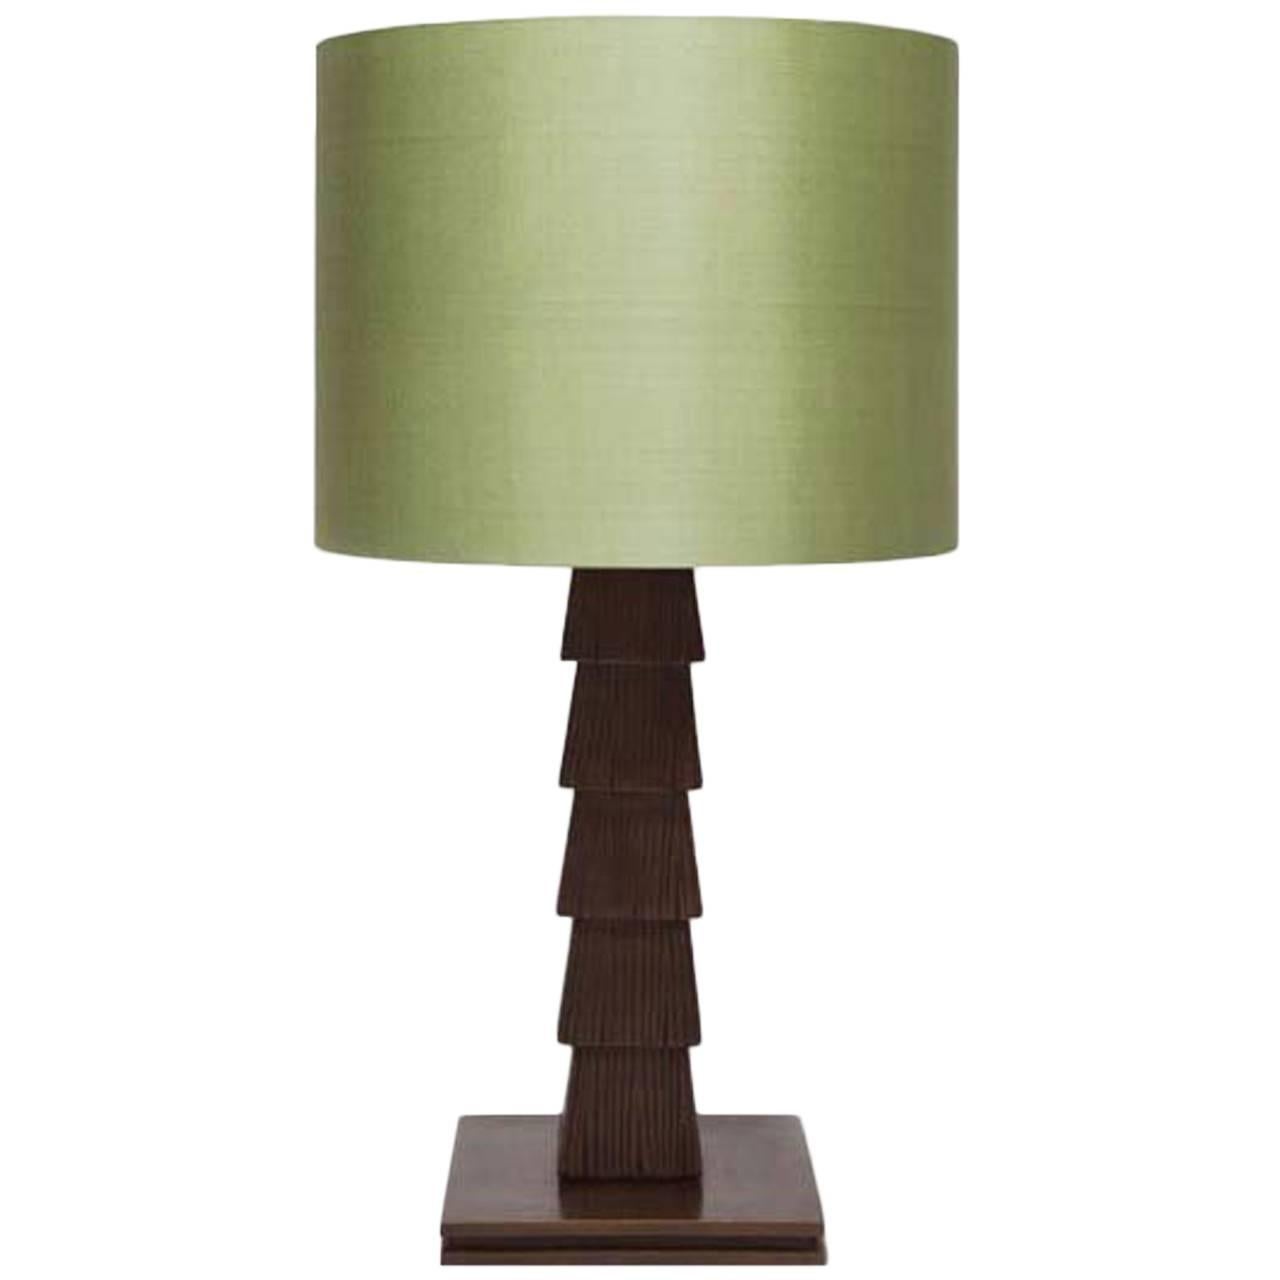 Gigi Table Lamp by Francis Sultana, Bronze and Silk Shade